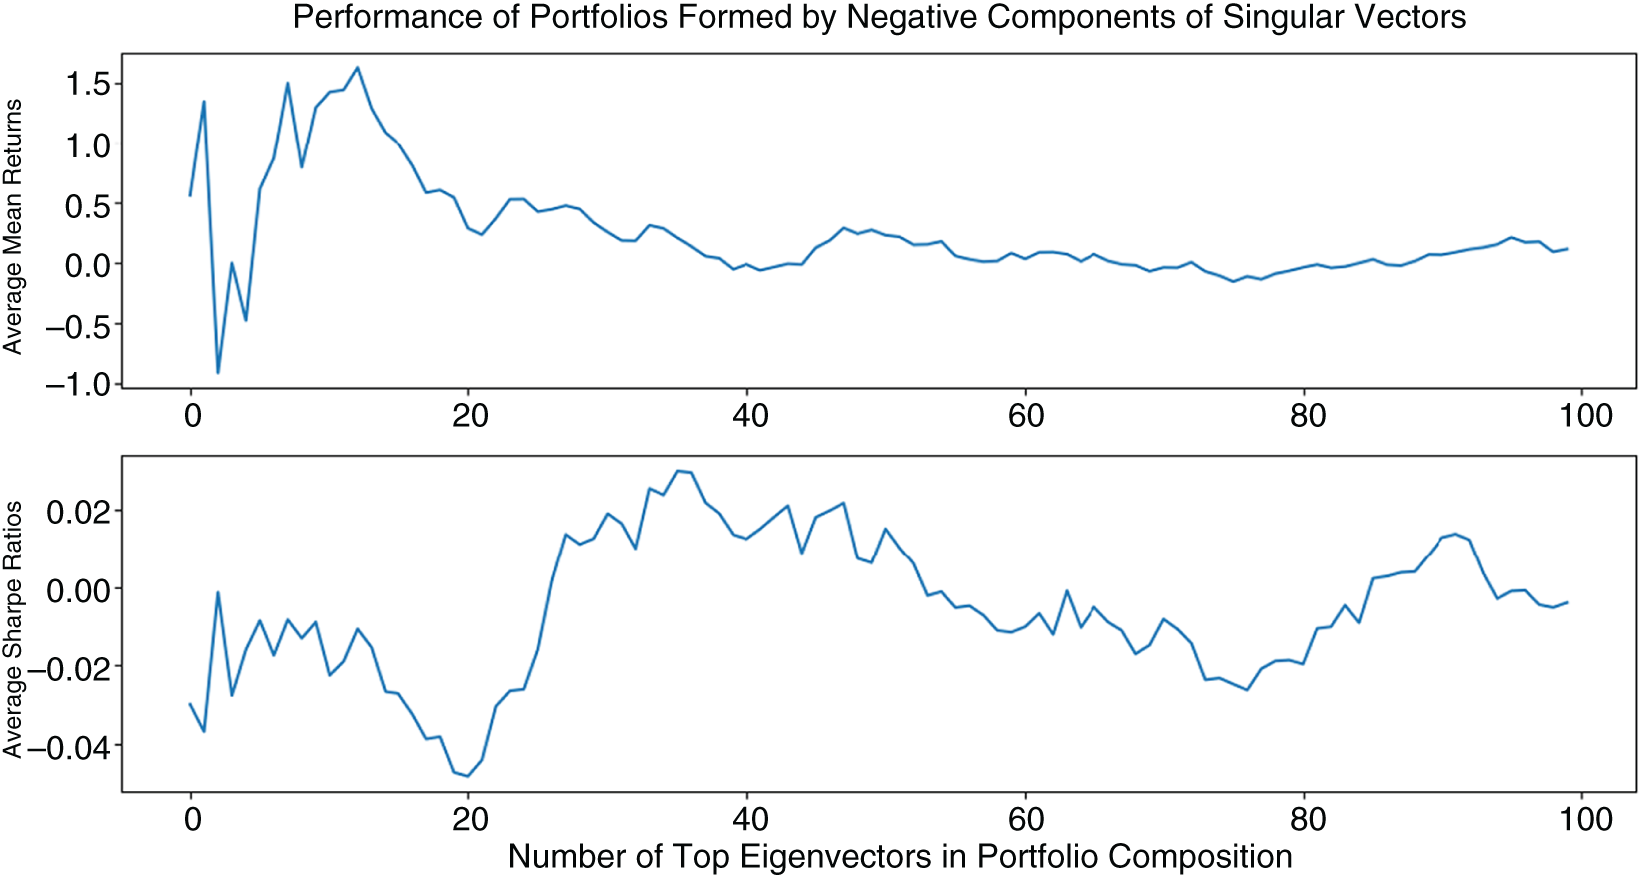 Graphs depict the average performance of 1,000 of negative-only components of 1–100 singular vectors. Portfolios consisting of only positive components around 40 singular vectors outperform as measured by mean Sharpe ratios.